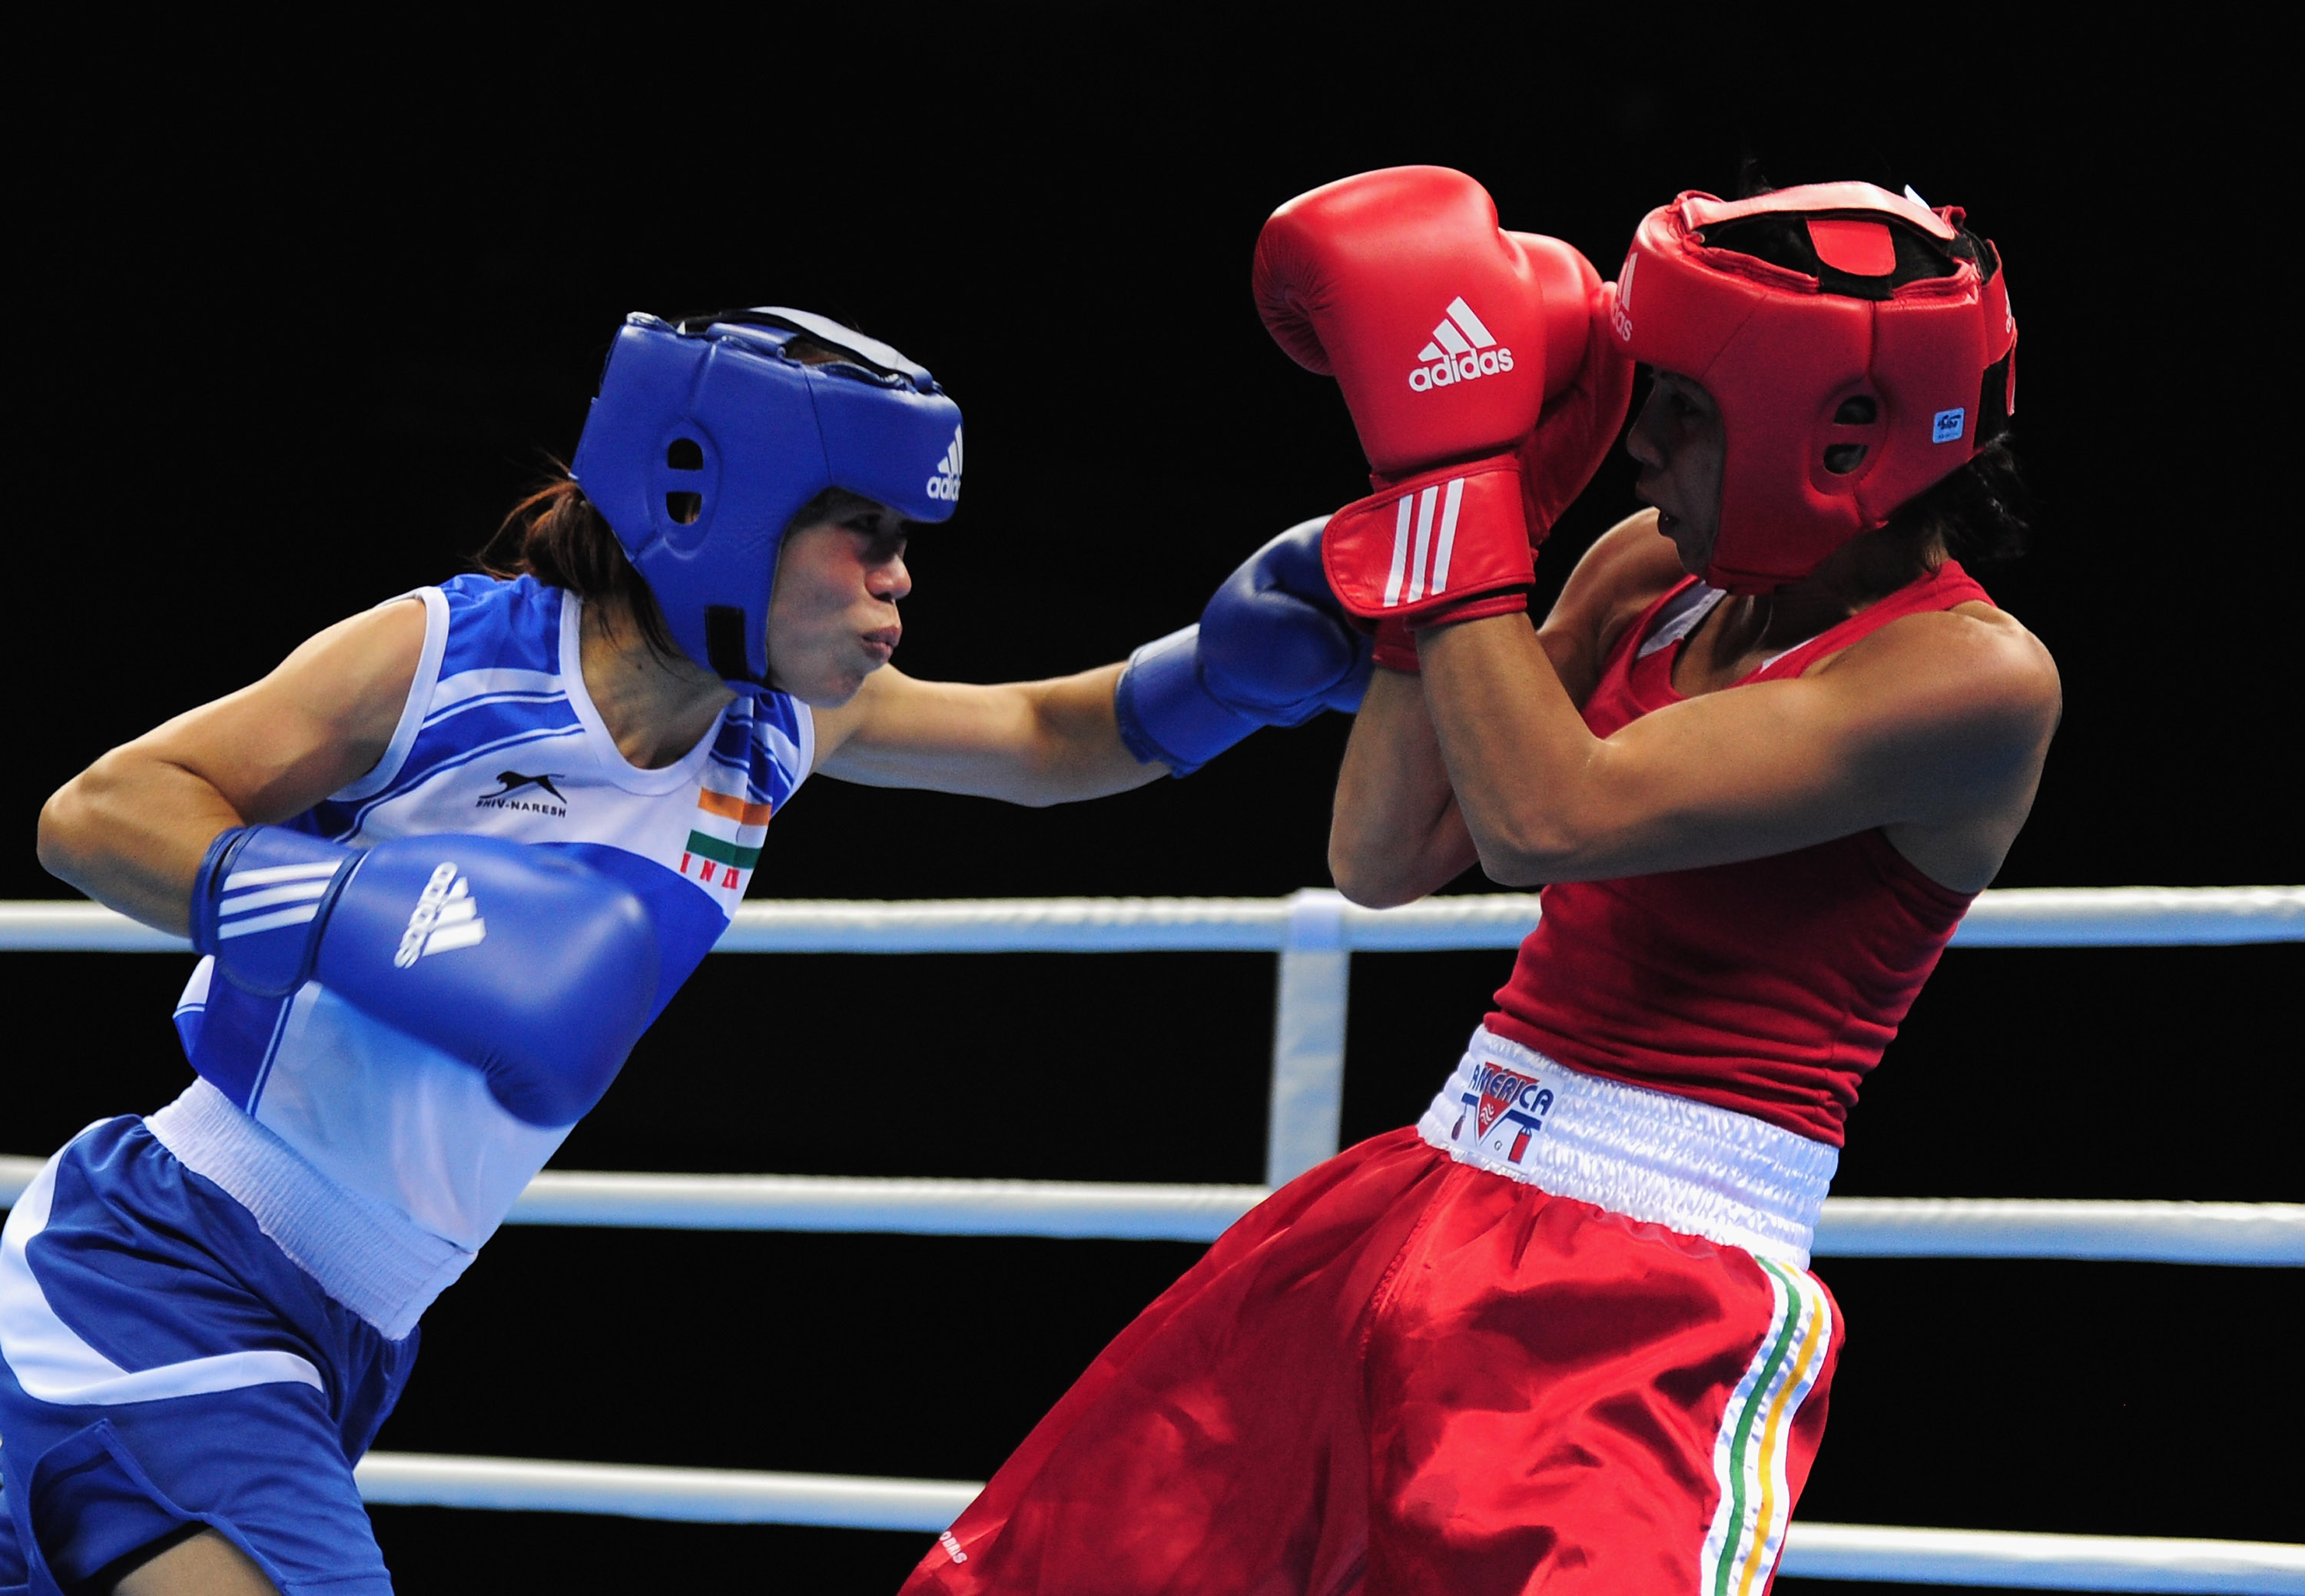 Women's World Boxing Ch’ships | MC Mary Kom settles for bronze after losing semi-final bout